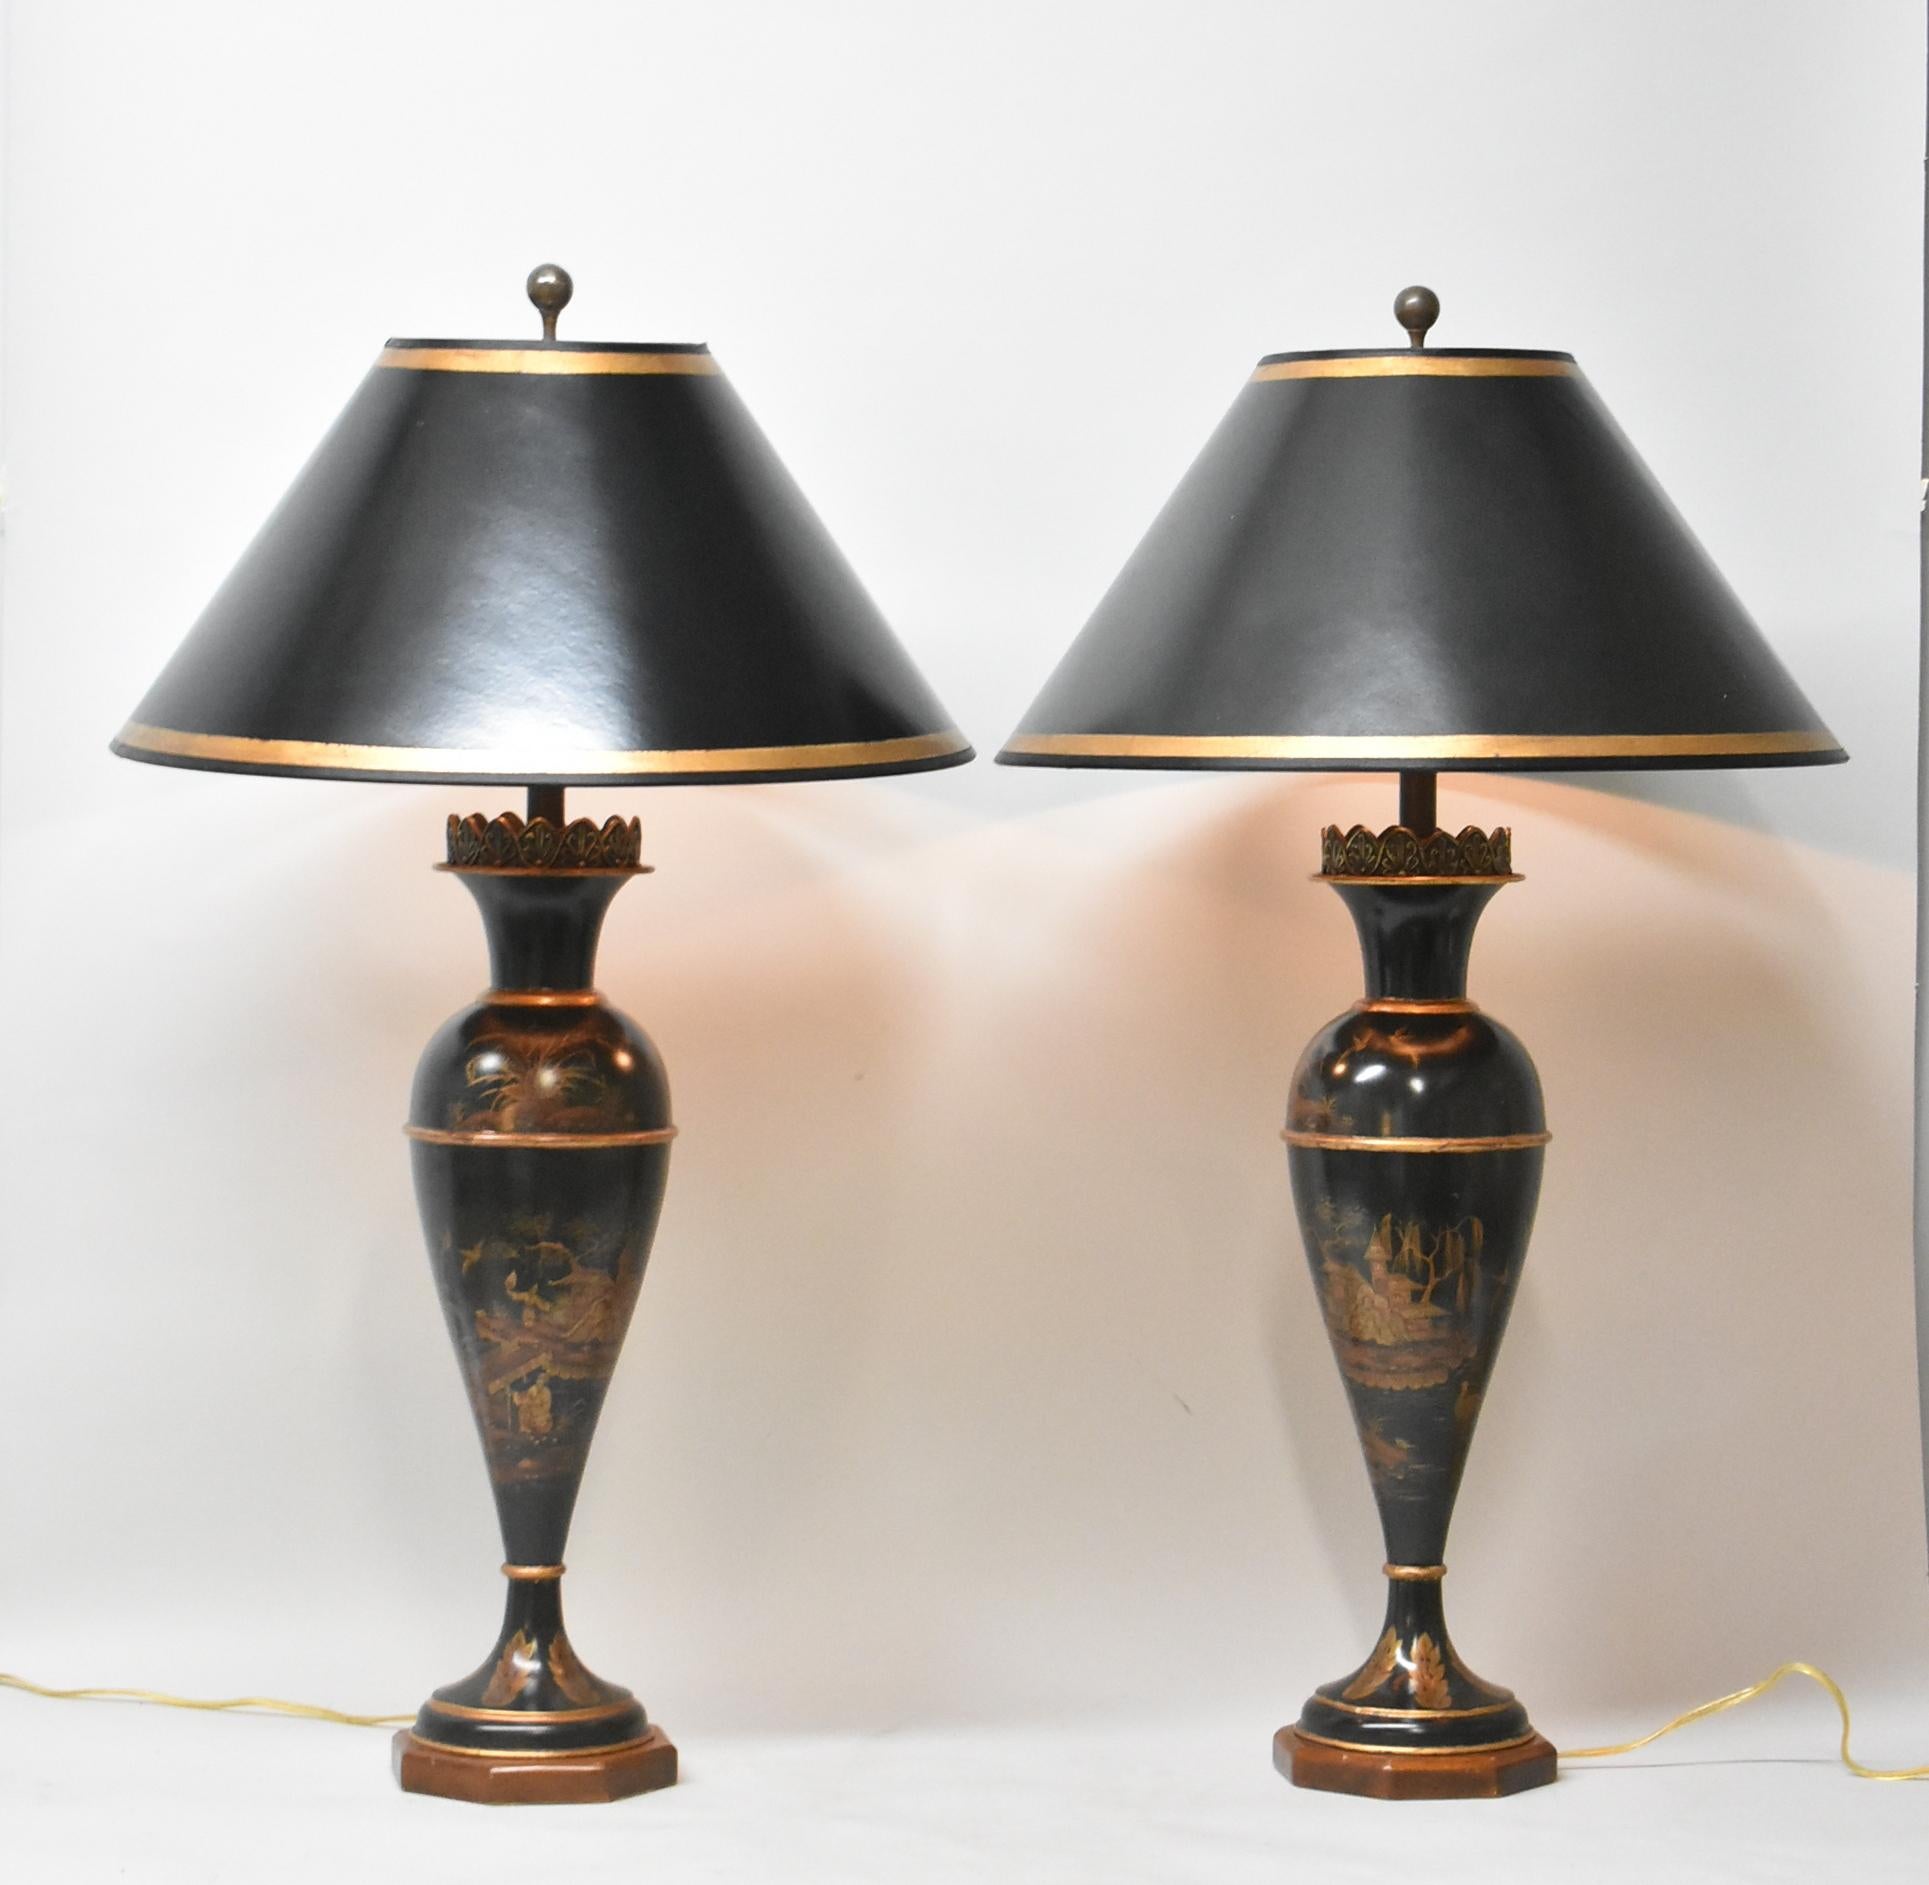 A pair of Asian style table lamps. They feature a black lacquer metal body with Asian scenes in gold tones, a mahogany hexagon base, a three-way switch and a heavy brass finial. The dimensions are 38.5